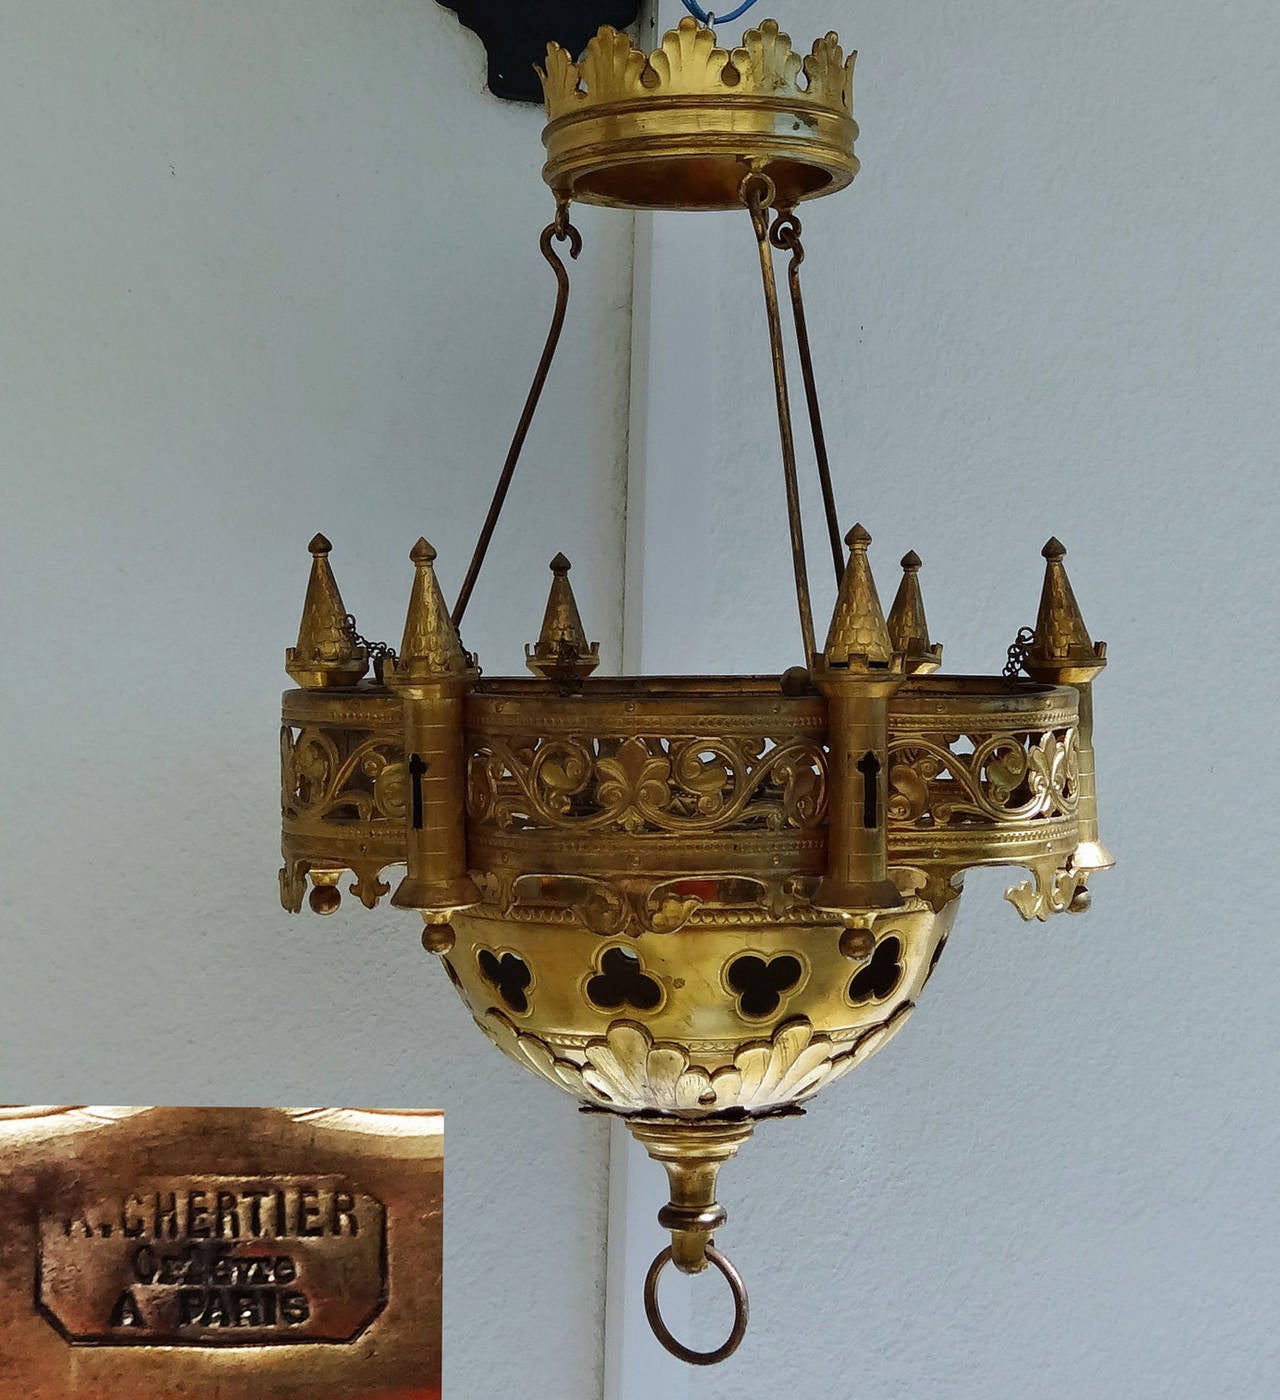 Gilt-bronze Gothic Revival six light chandelier 
by Chertier, 
Paris, 
vers 1850. 
38 cm (15 inches) diam. 60 cm (23 1/2 inches) high

In excellent condition with nice colour and patina to the gilt.

Please ask for more images or information.